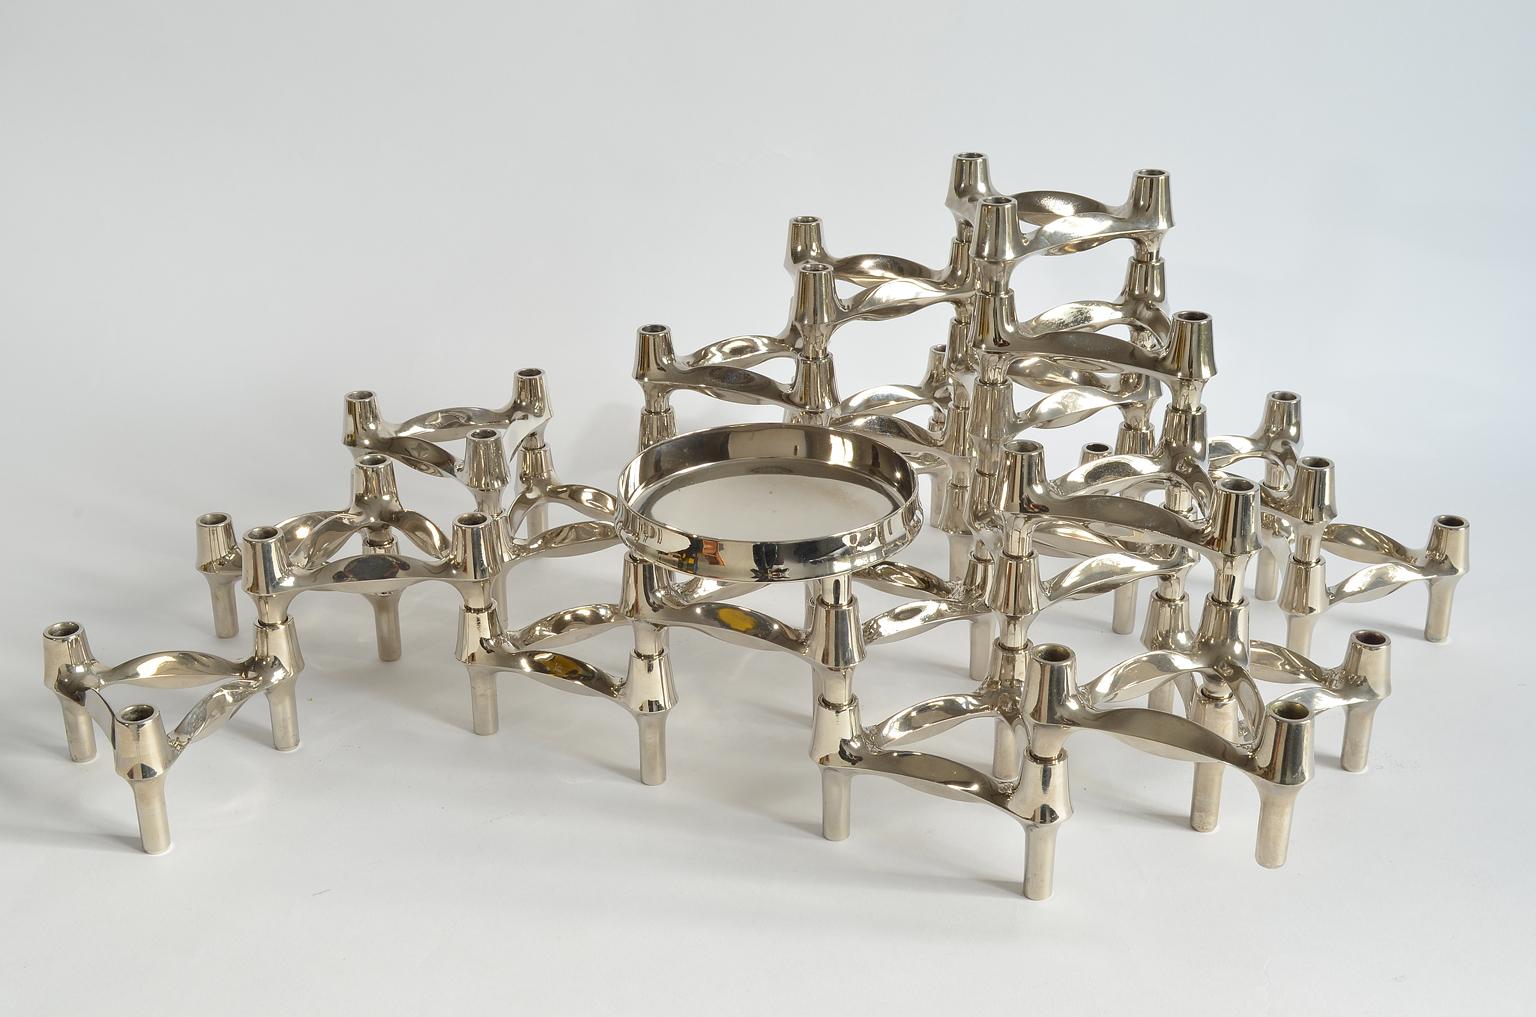 Sculptural object of 25 BMF Fritz Nagel and Caesar Stoffi Modular Candleholder Elements, Germany, 1970s. Metal chromed silver.